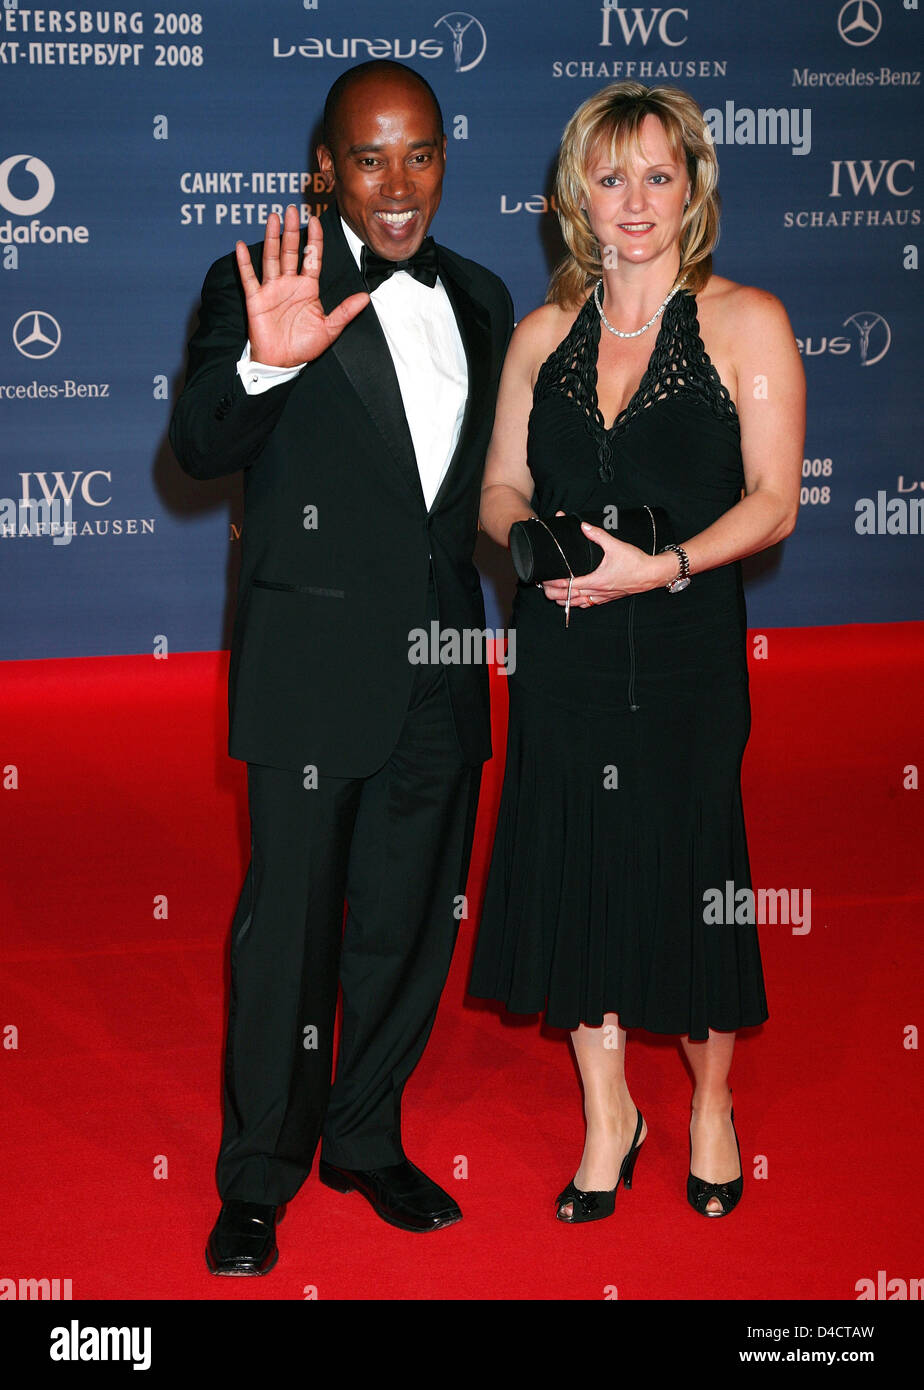 British Anthony Hamilton (L), father of Formula One rookie Lewis Hamilton, and his wife Linda (R), pose on the red carpet as she arrives for the 'Laureus World Sports Awards' in Saint Petersburg, Russian Federation, 17 February 2008. Outstanding athletes, who had been selected by a jury comprised of former top athletes, were awarded the Laureus Sports Award on 18 February. Photo: G Stock Photo